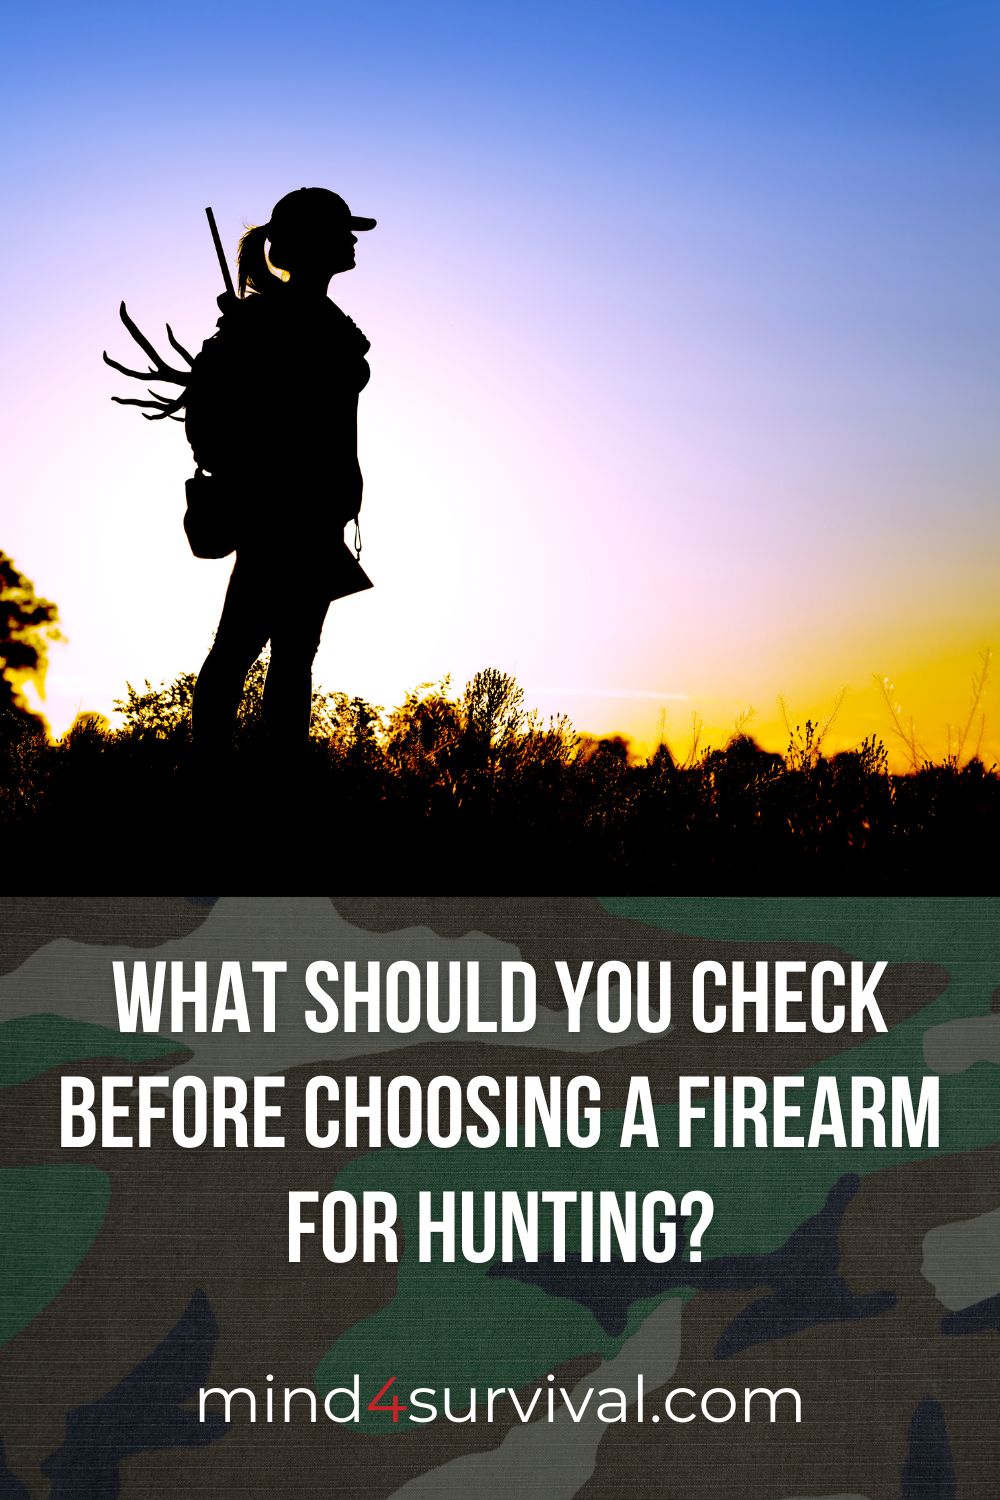 What Should You Check Before Choosing a Firearm for Hunting?